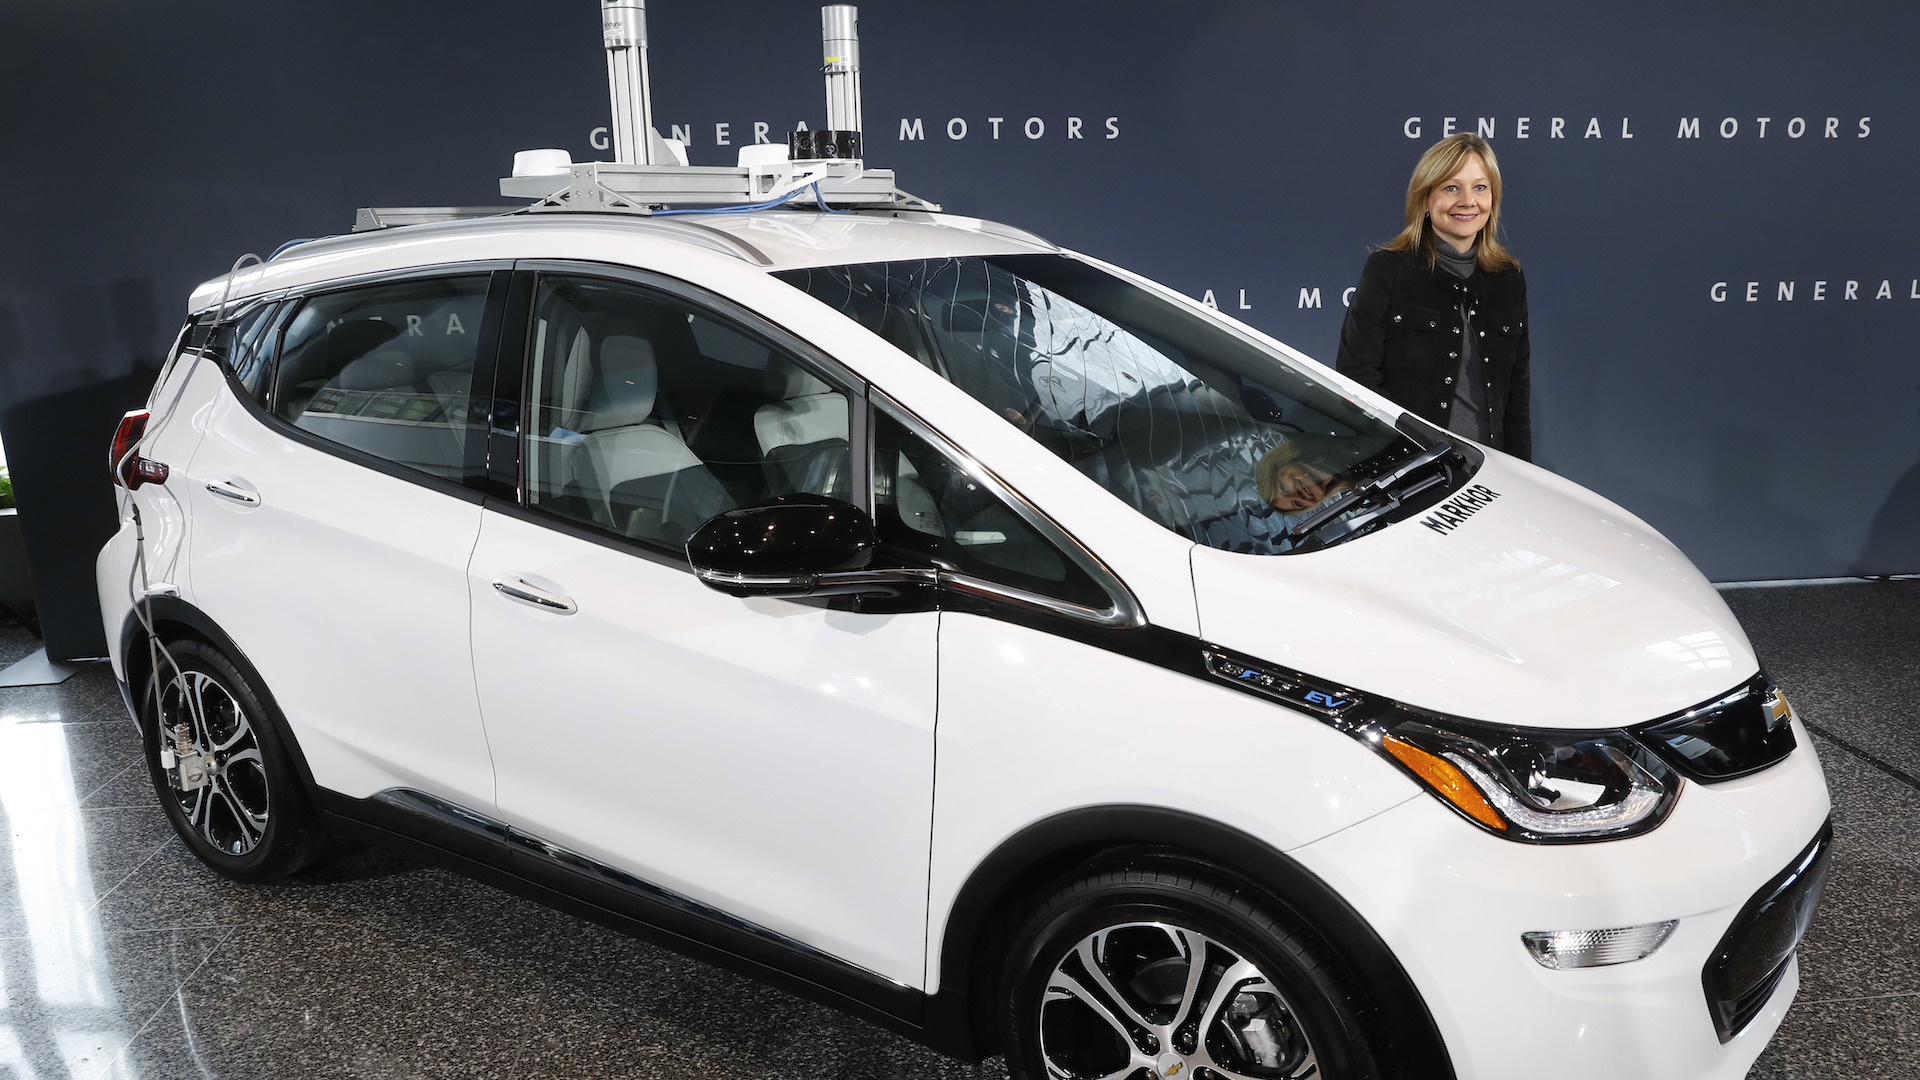 GM CEO Mary Barra Promises Over-The-Air Updates for Cars by 2020